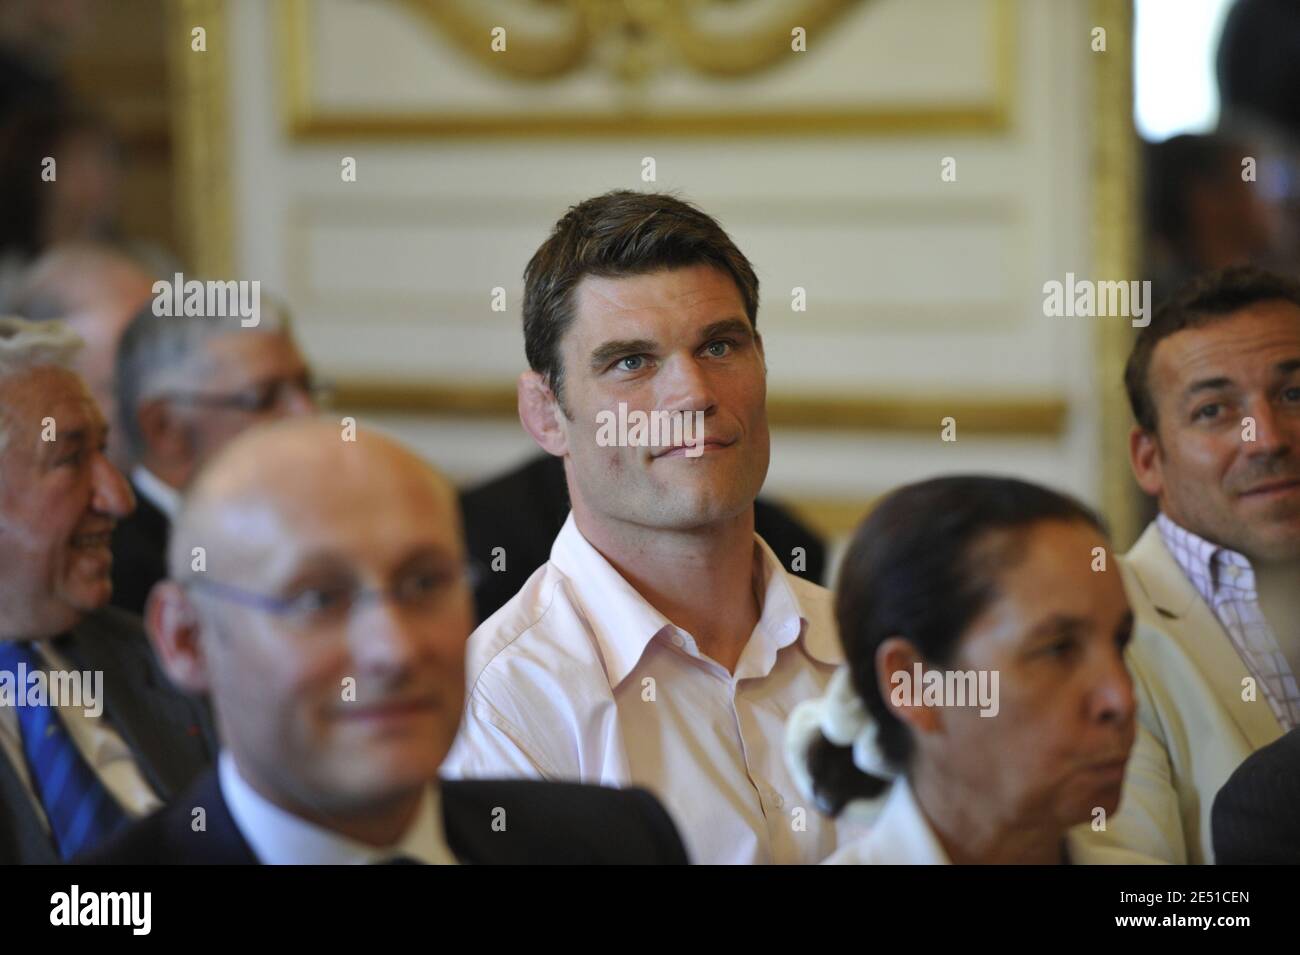 french-rugbyman-fabien-pelous-is-honored-at-the-french-senate-in-paris-france-on-may-13-2008-photo-by-ammar-abd-rabbocameleonabacapresscom-2E51CEN.jpg